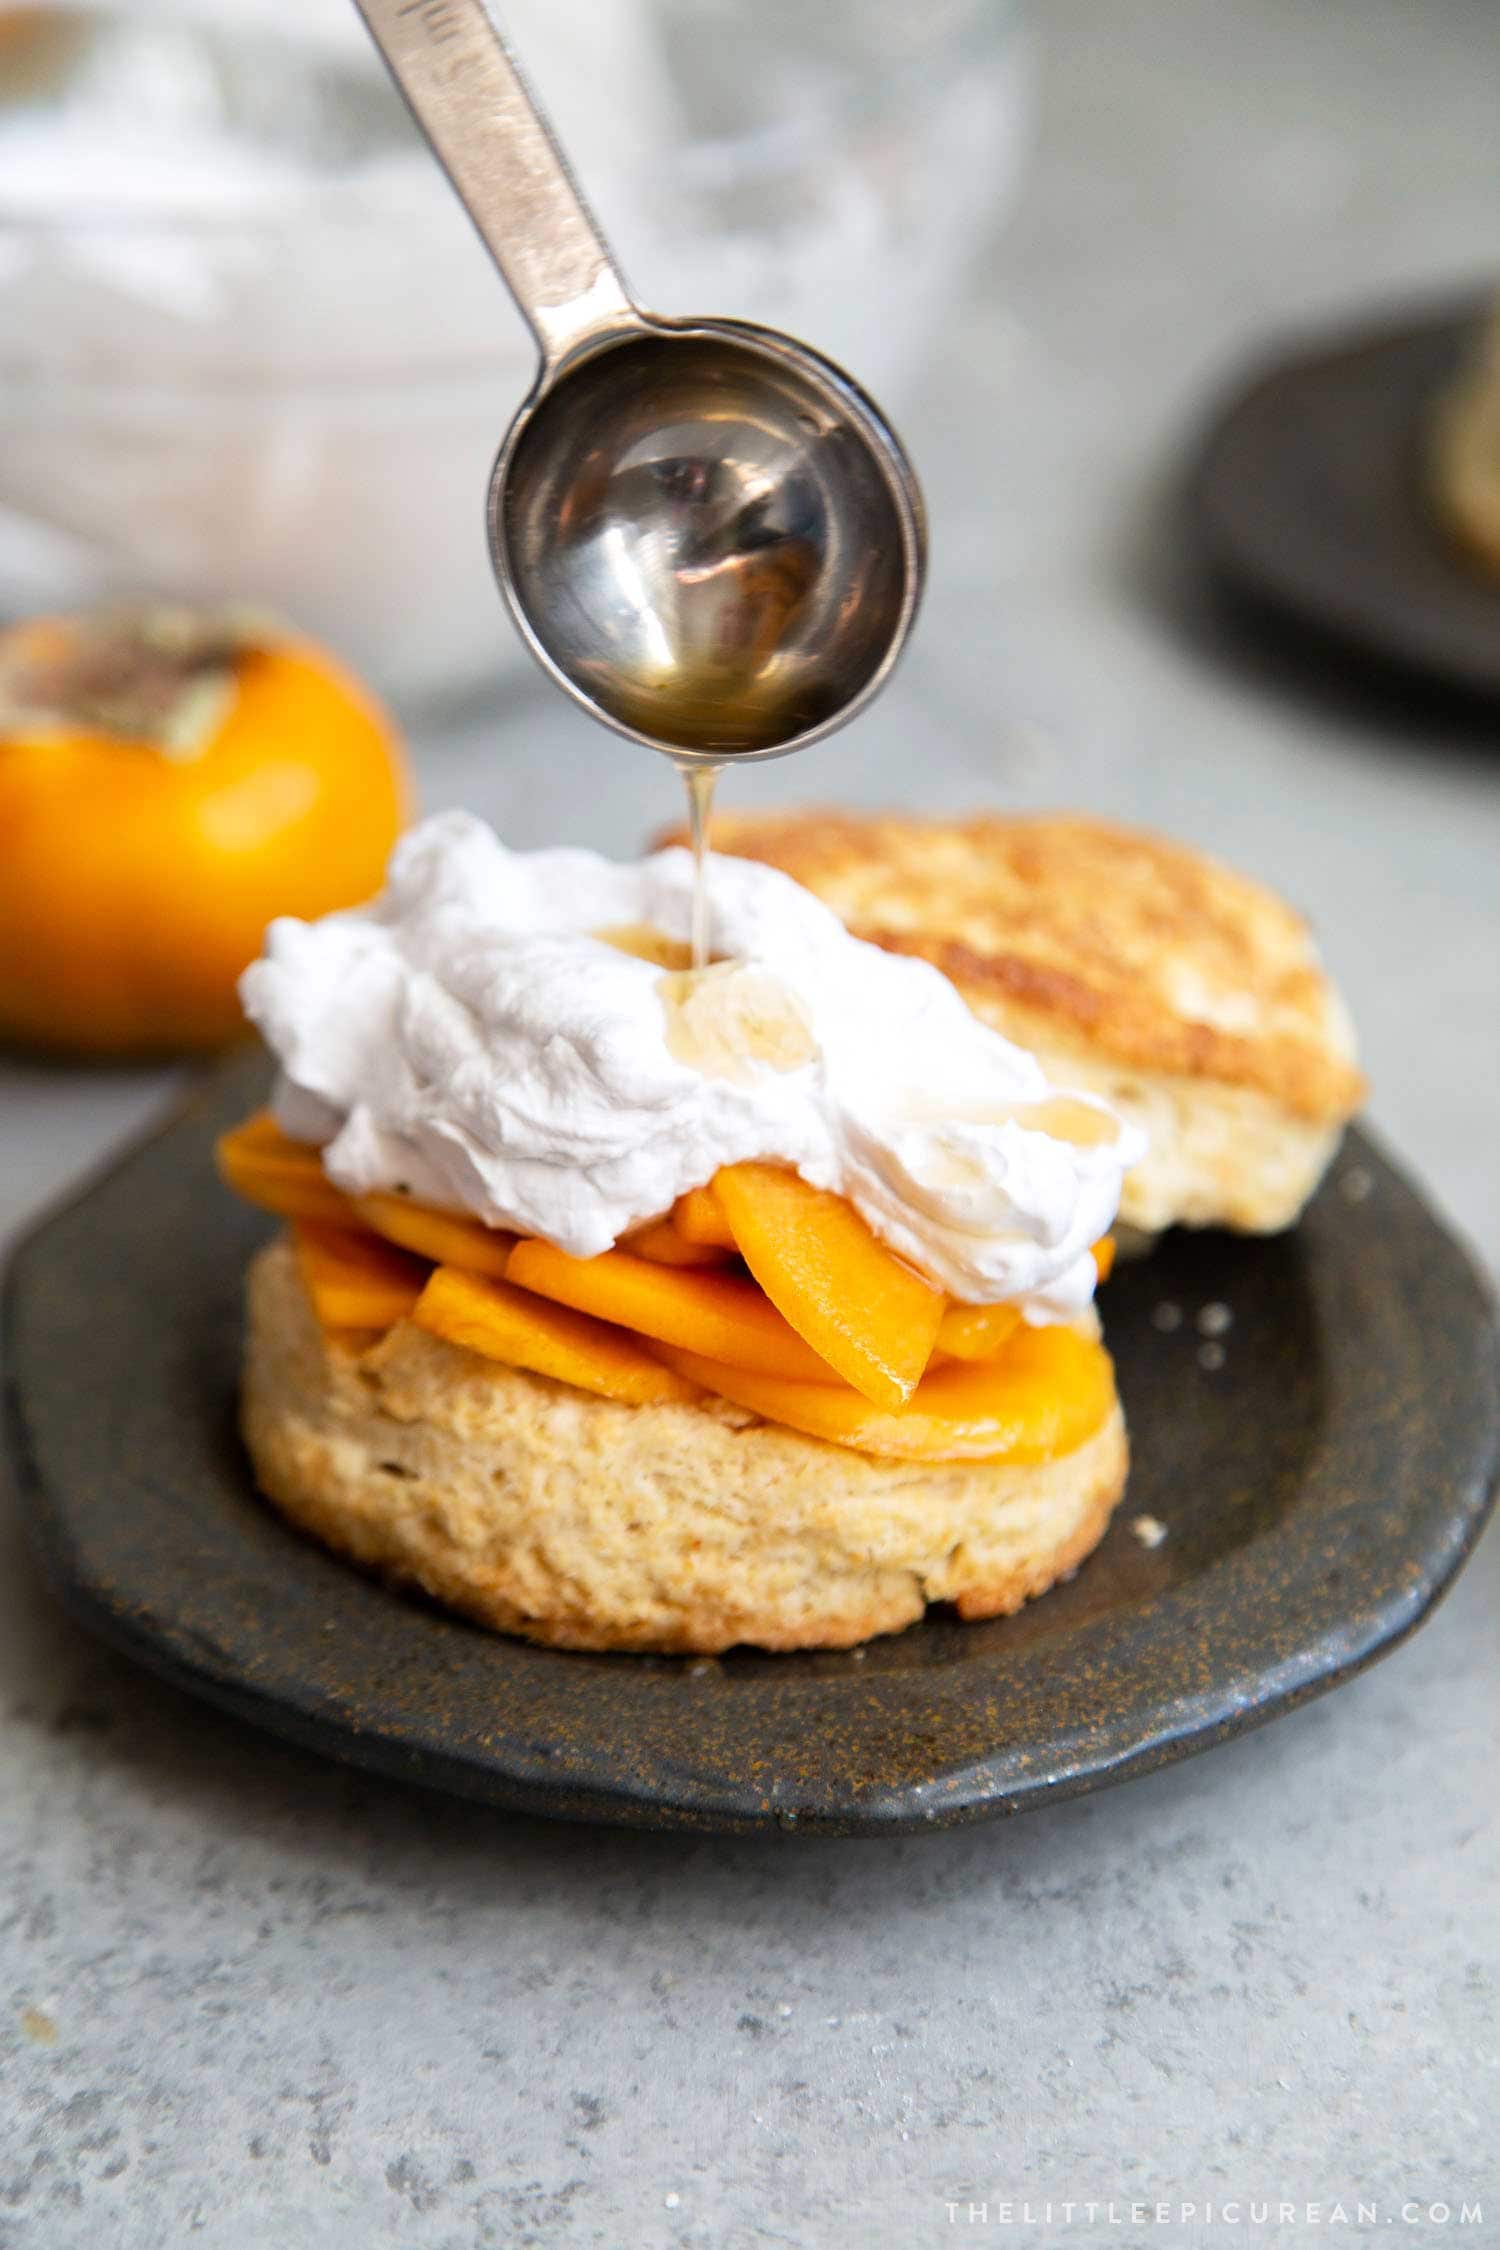 Coconut Persimmon Shortcake. A new spin strawberry shortcake. This dessert features coconut milk shortcake biscuits filled with sliced persimmons and coconut whipped cream. #persimmons #fuyupersimmons #fallbaking #shortcake #biscuits